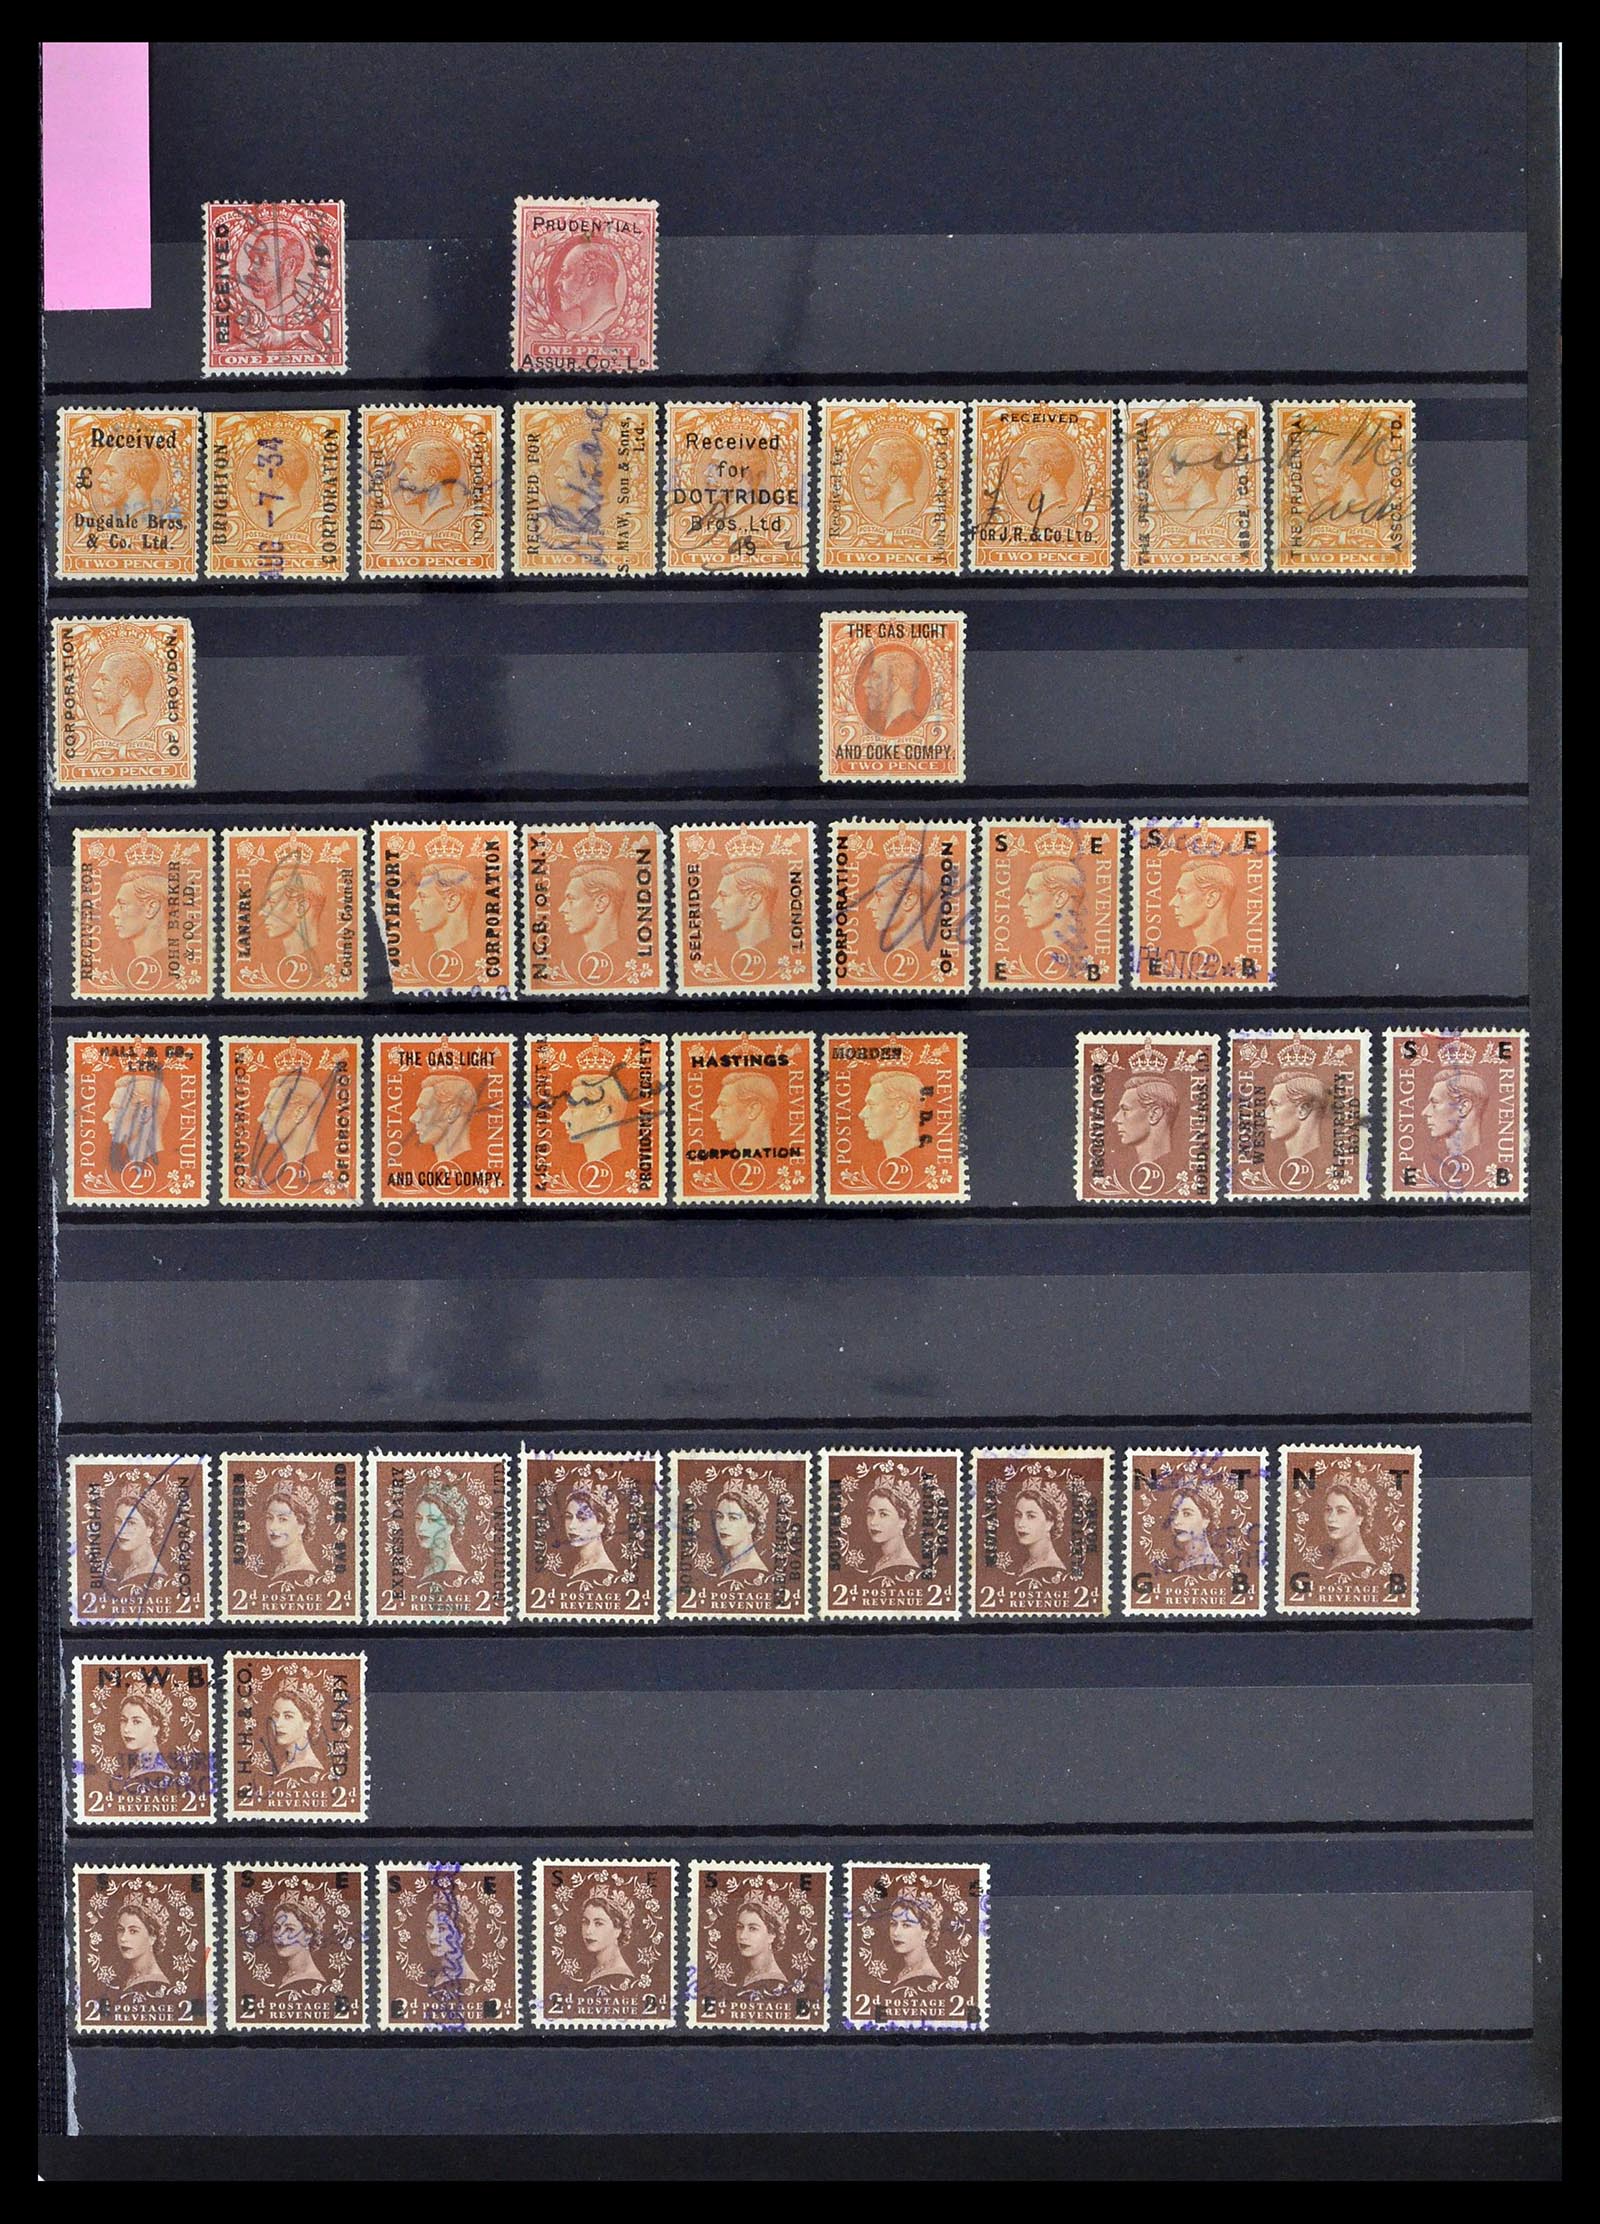 39196 0134 - Stamp collection 39196 Great Britain 1844-1955.